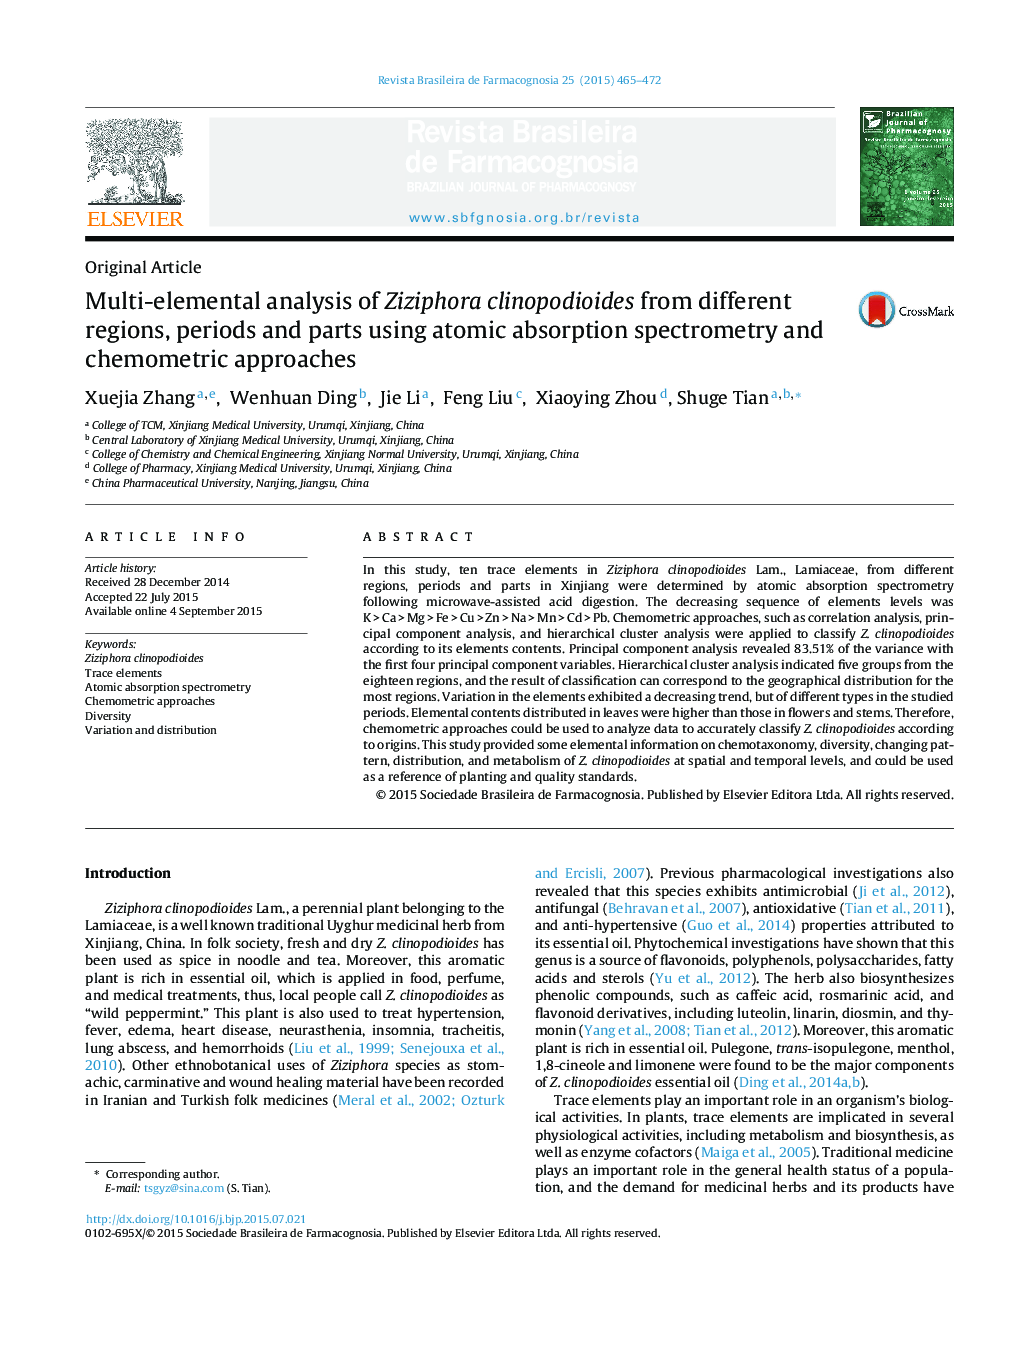 Multi-elemental analysis of Ziziphora clinopodioides from different regions, periods and parts using atomic absorption spectrometry and chemometric approaches